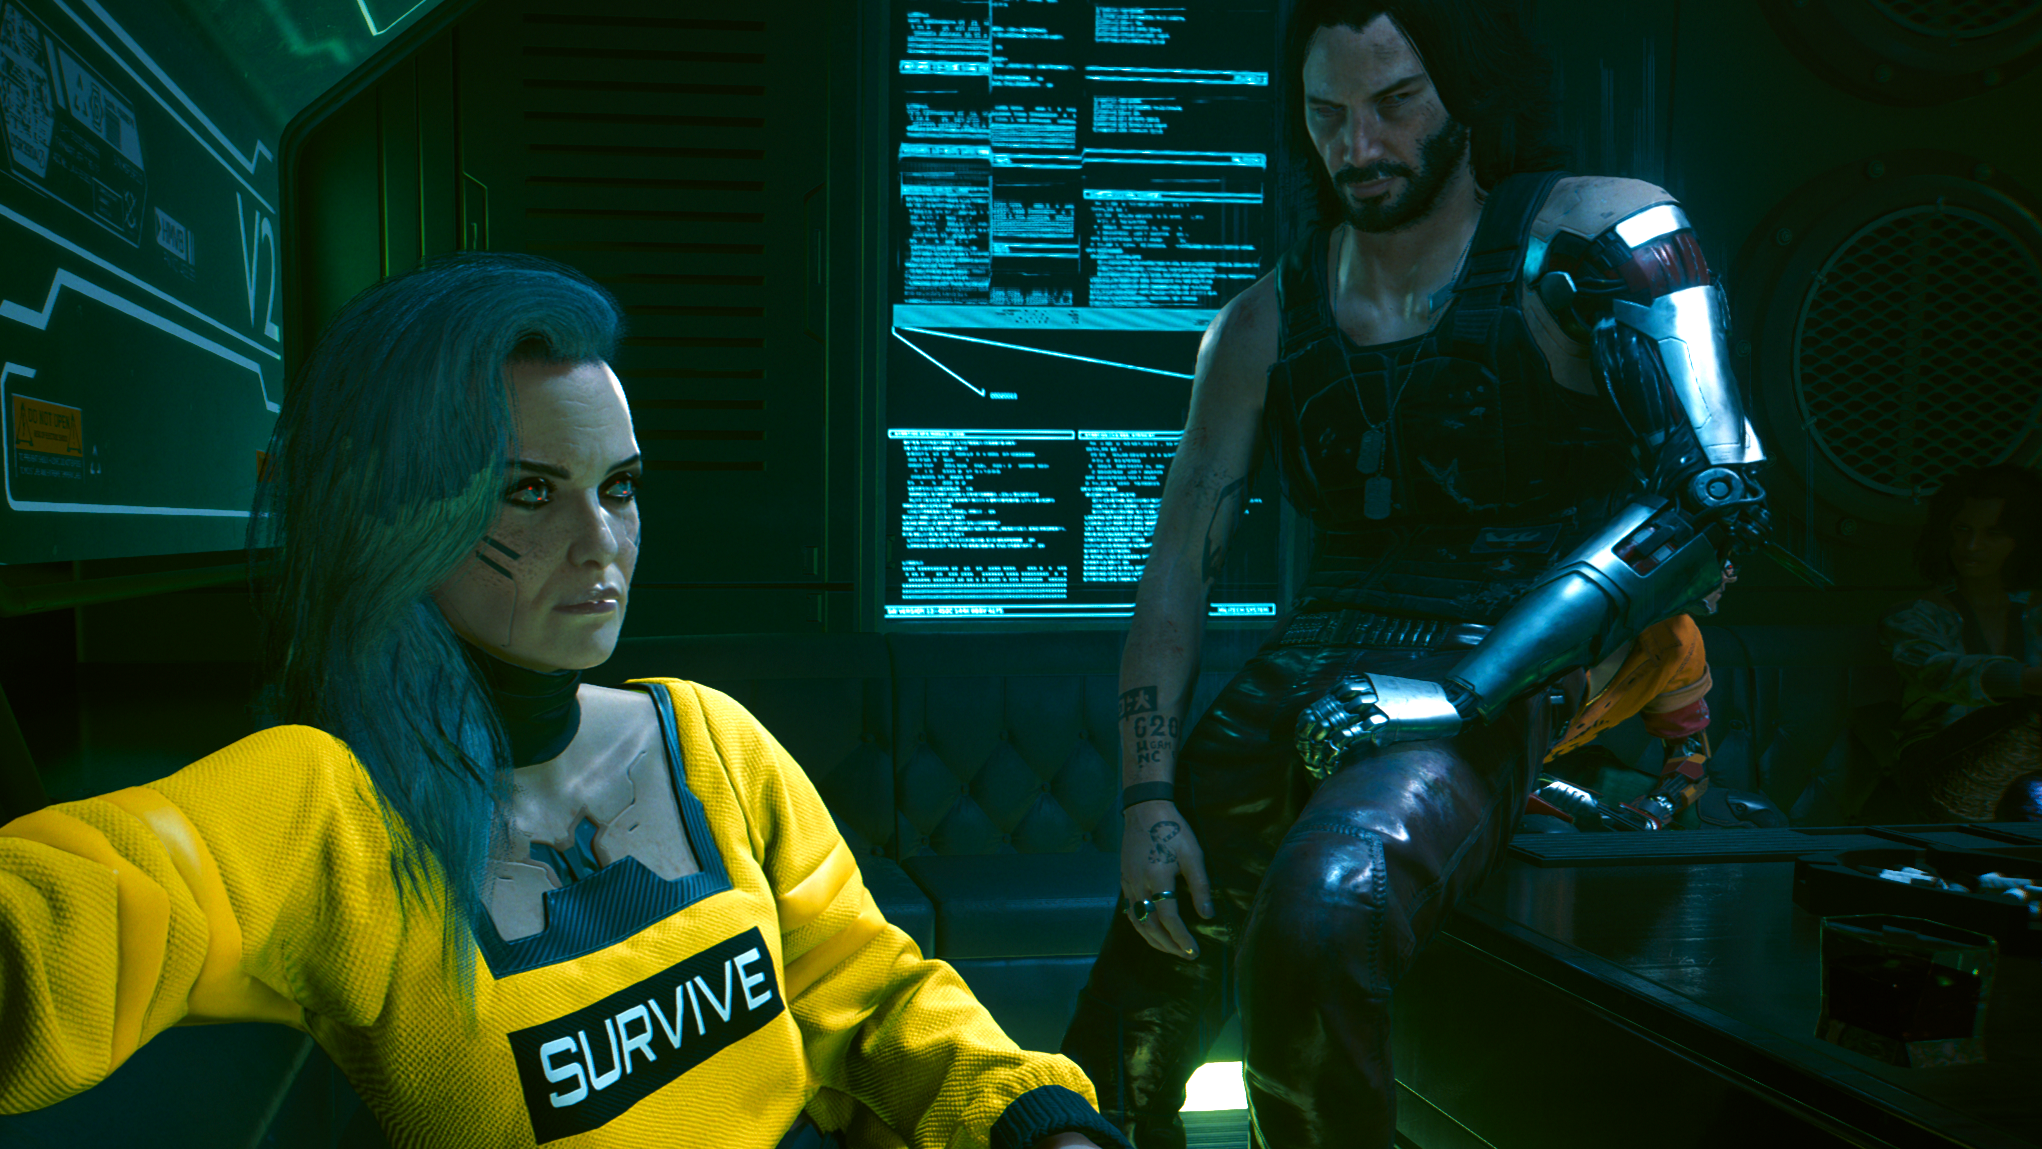 Cyberpunk 2077 2.0 sneakily adds a 'look at your cool gun' button